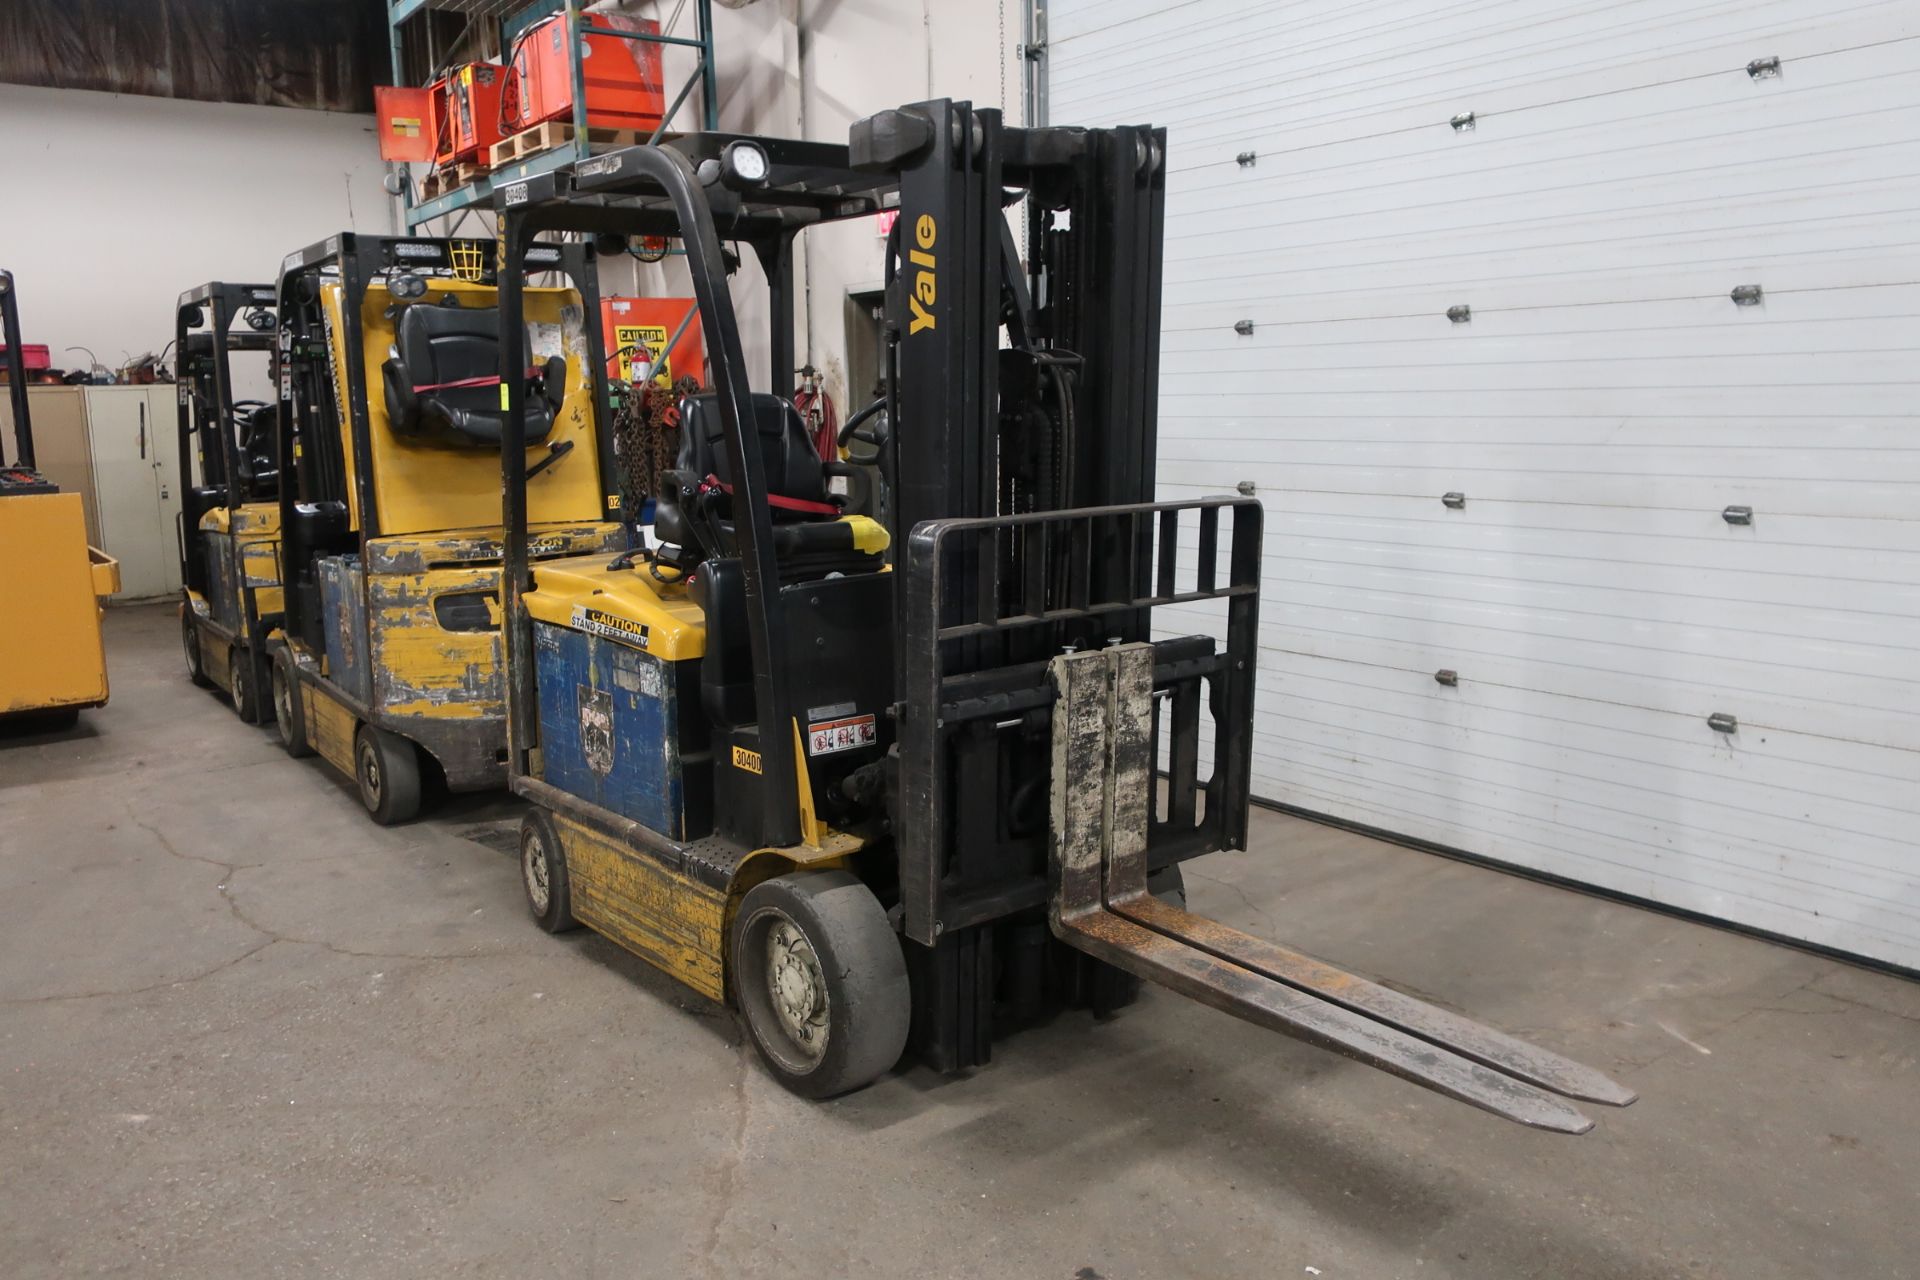 FREE CUSTOMS - 2014 Yale 5000lbs Capacity Forklift with 3-stage mast - electric with charger with - Image 2 of 2